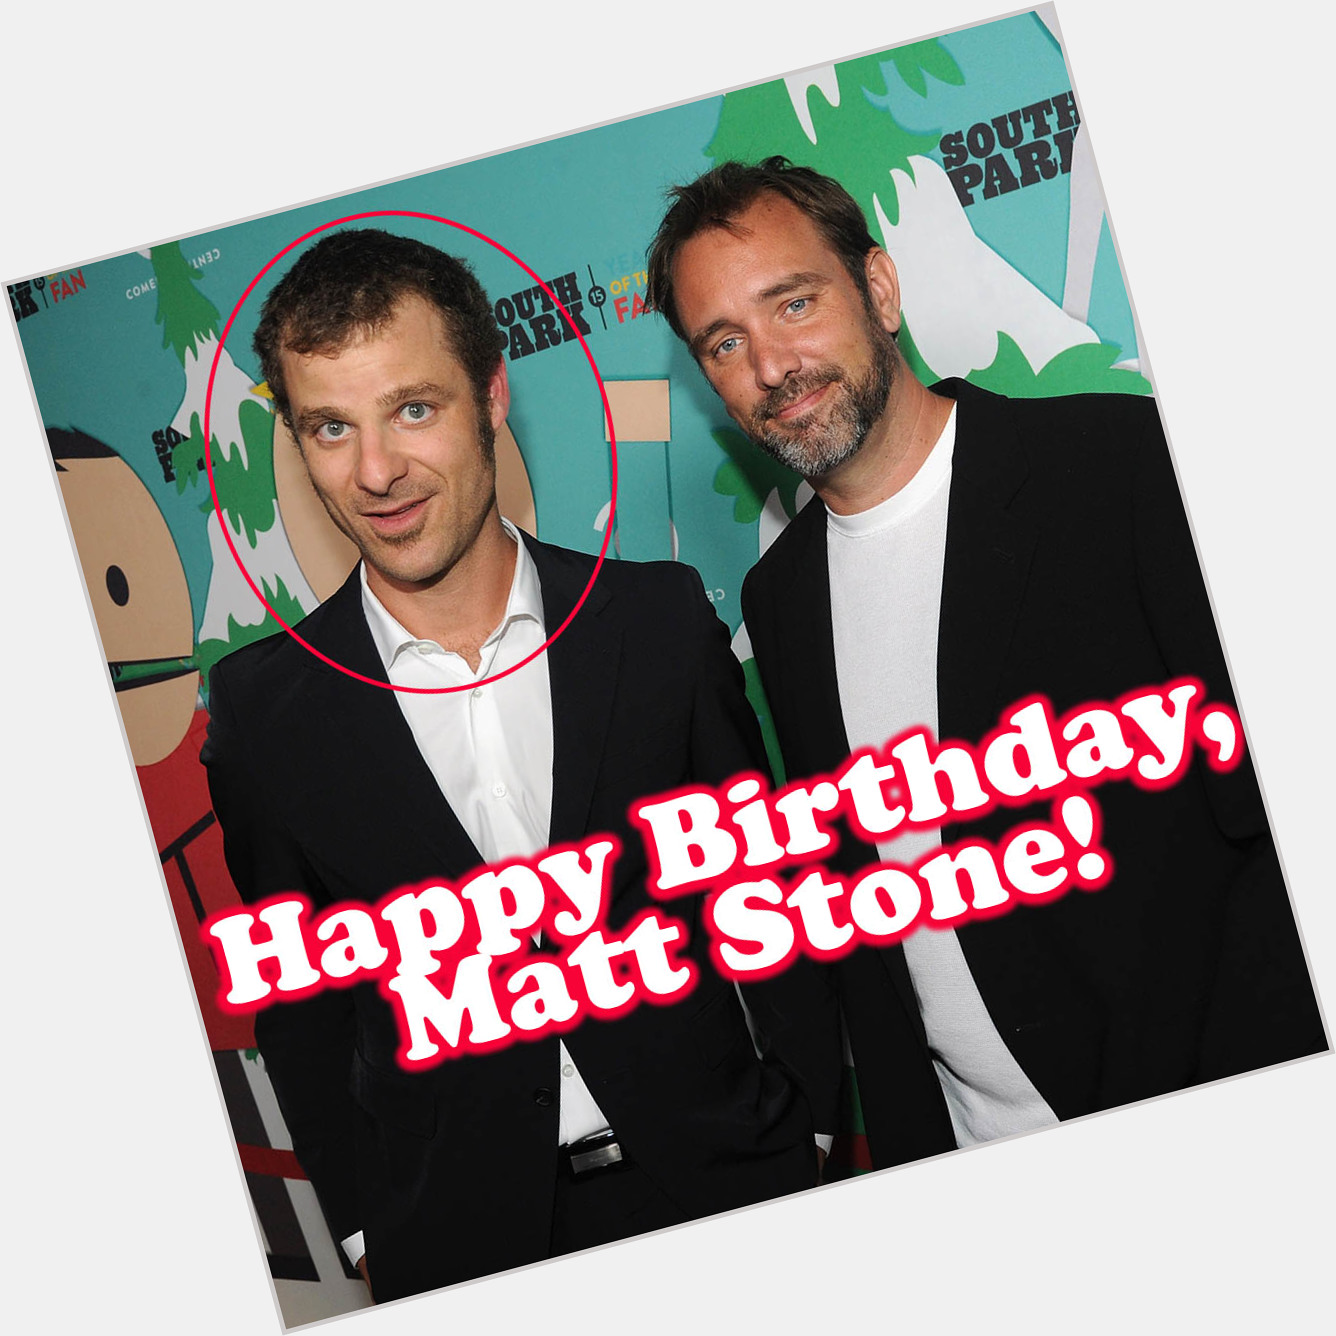 Happy Birthday, Matt Stone! The South Park co-creator was born in Houston. He is 49 years old today. 